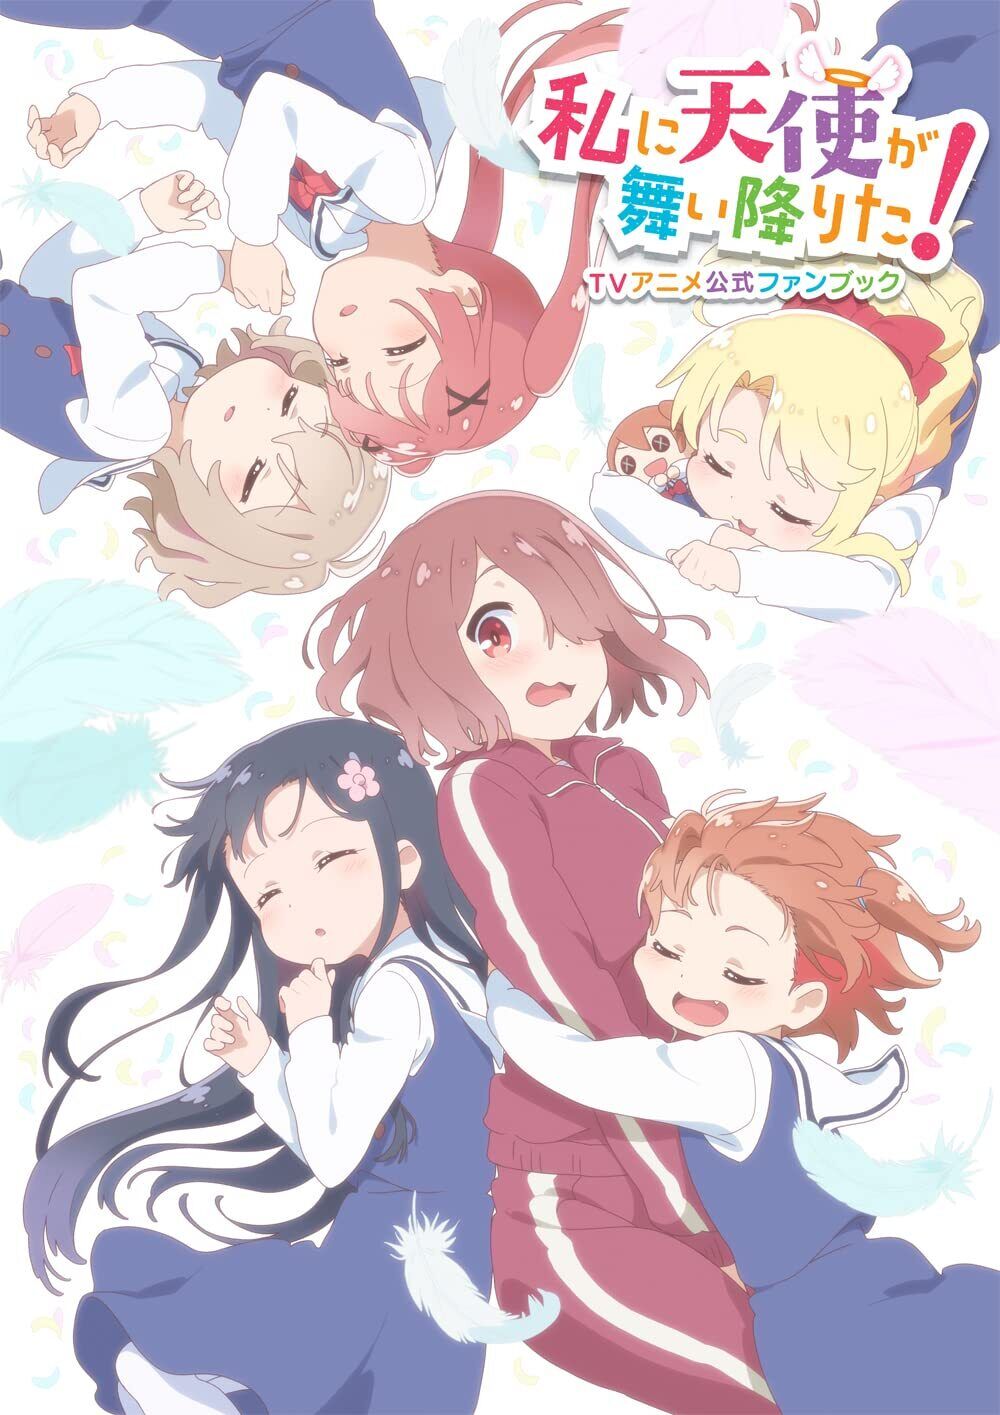 Wataten: An Angel Flew Down to Me TV Animation Official Fan Book | JAPAN